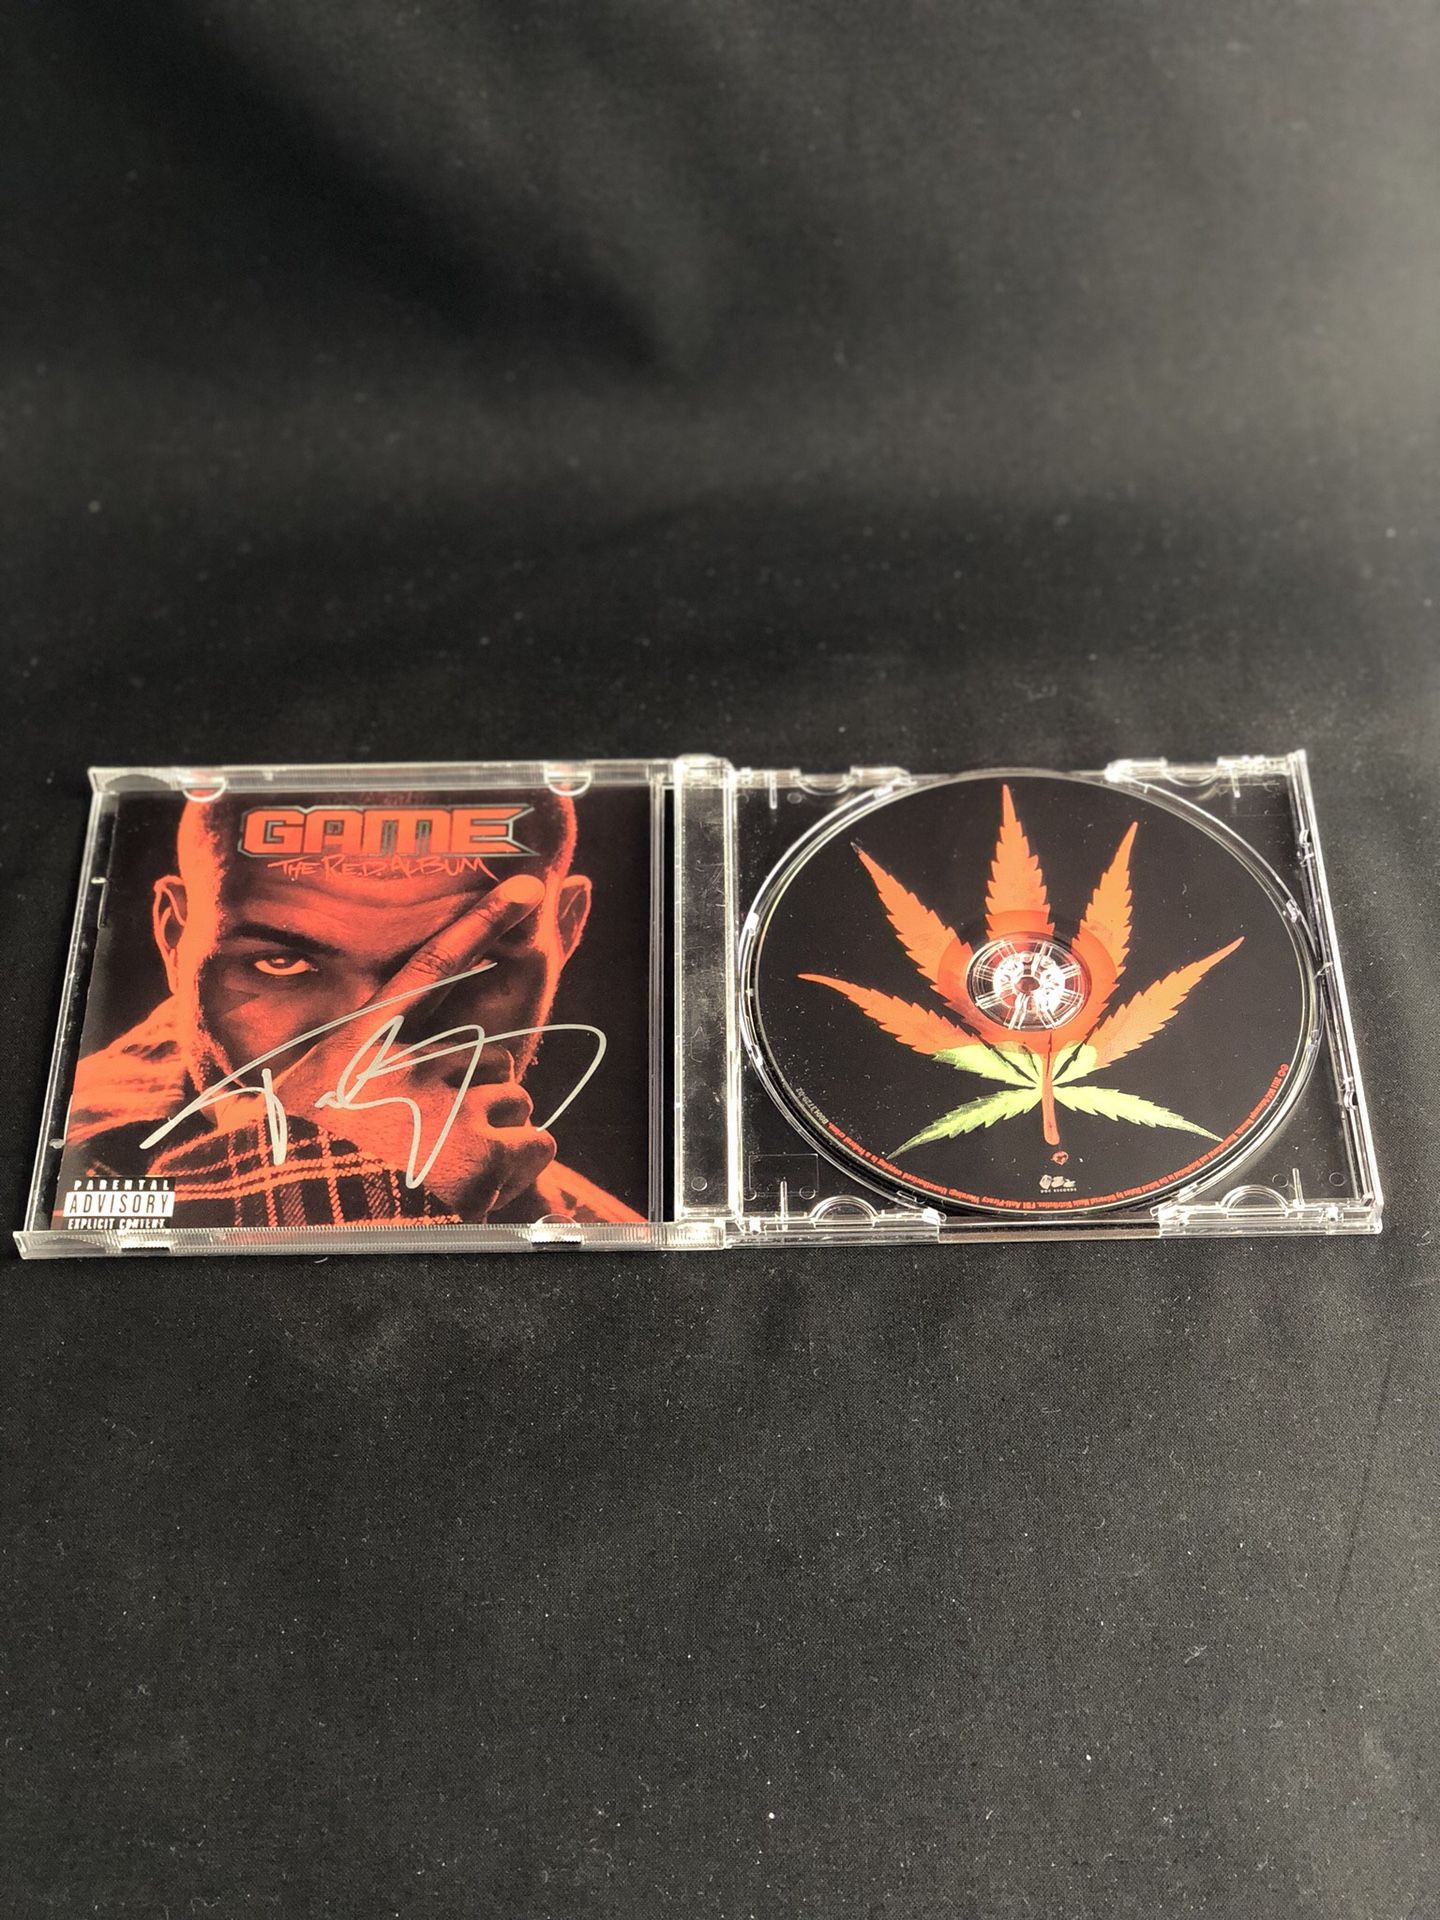 The Game signed CD cover